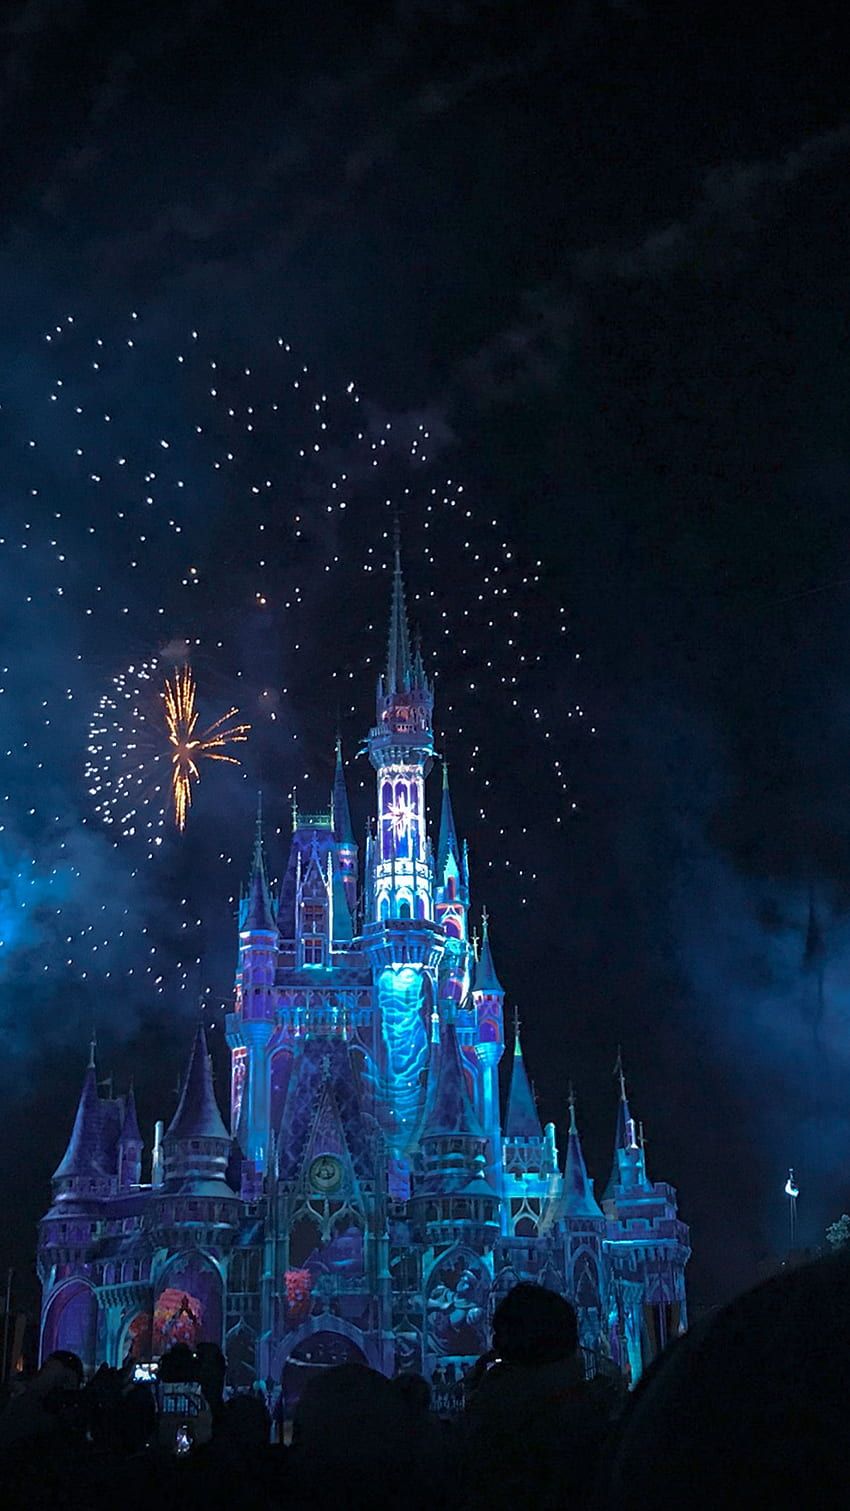 A picture of the castle at Disney world with fireworks going off in the sky - Disneyland